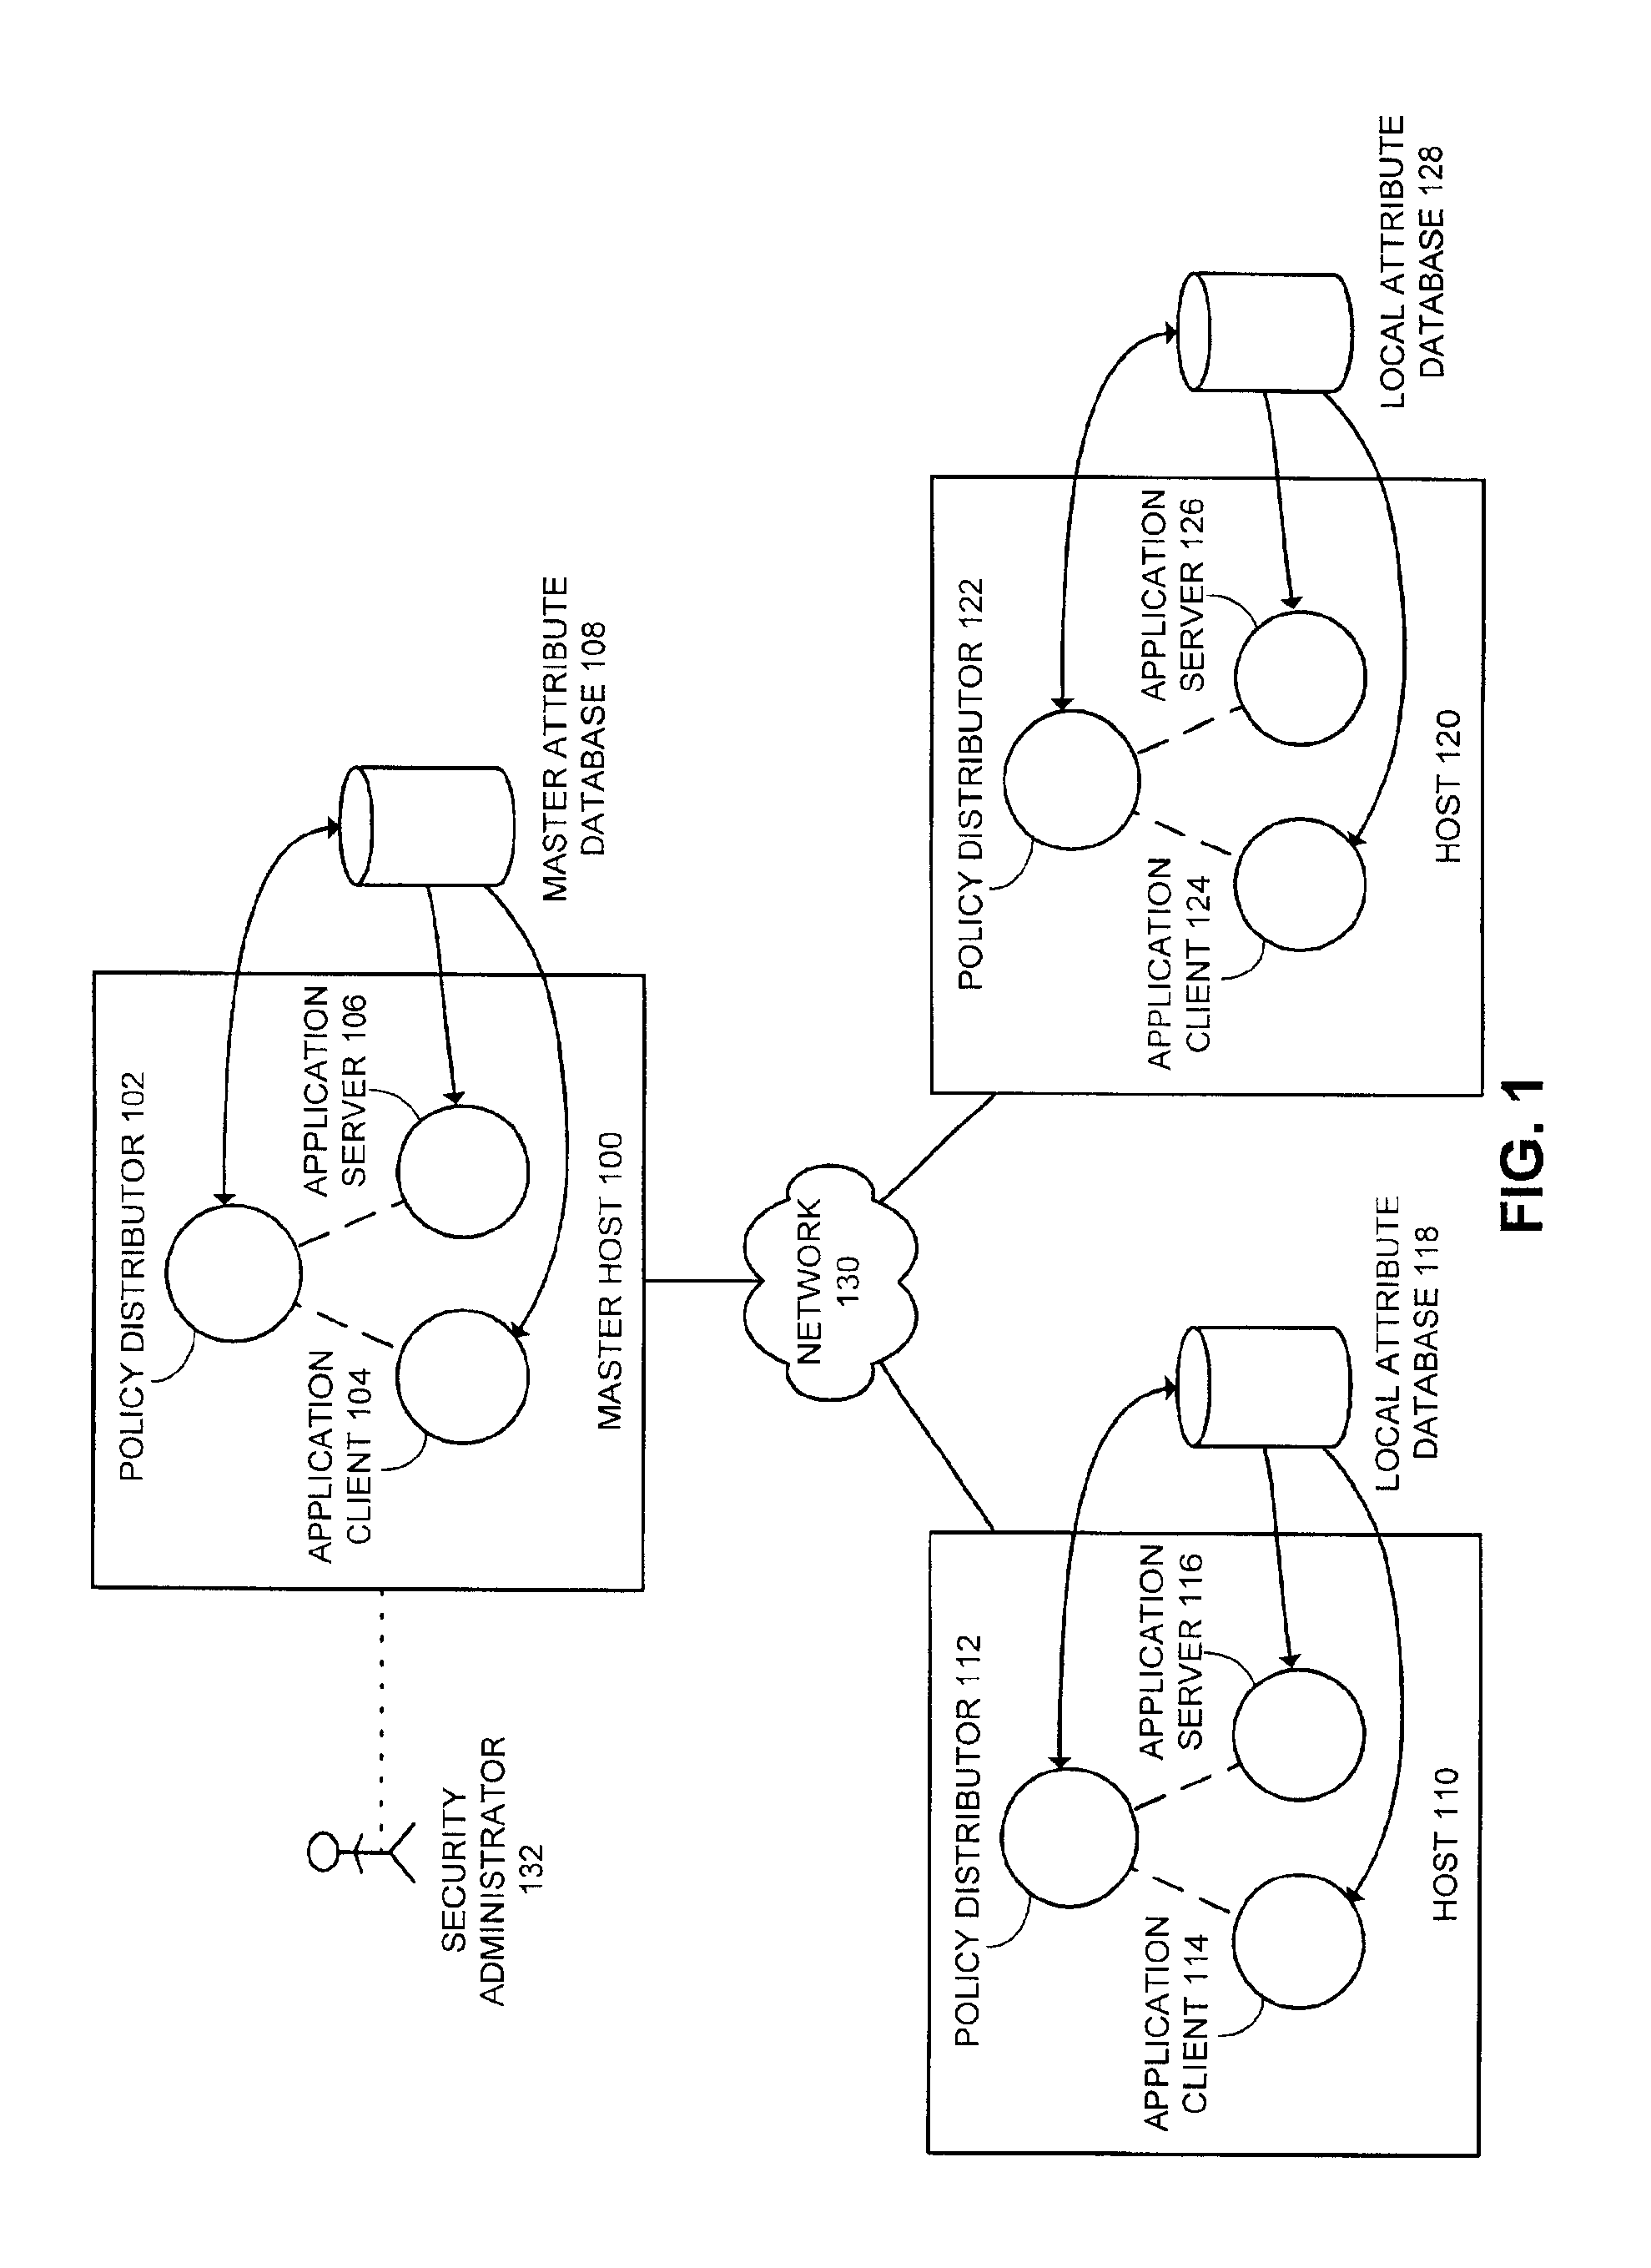 Method and apparatus for securely and dynamically modifying security policy configurations in a distributed system